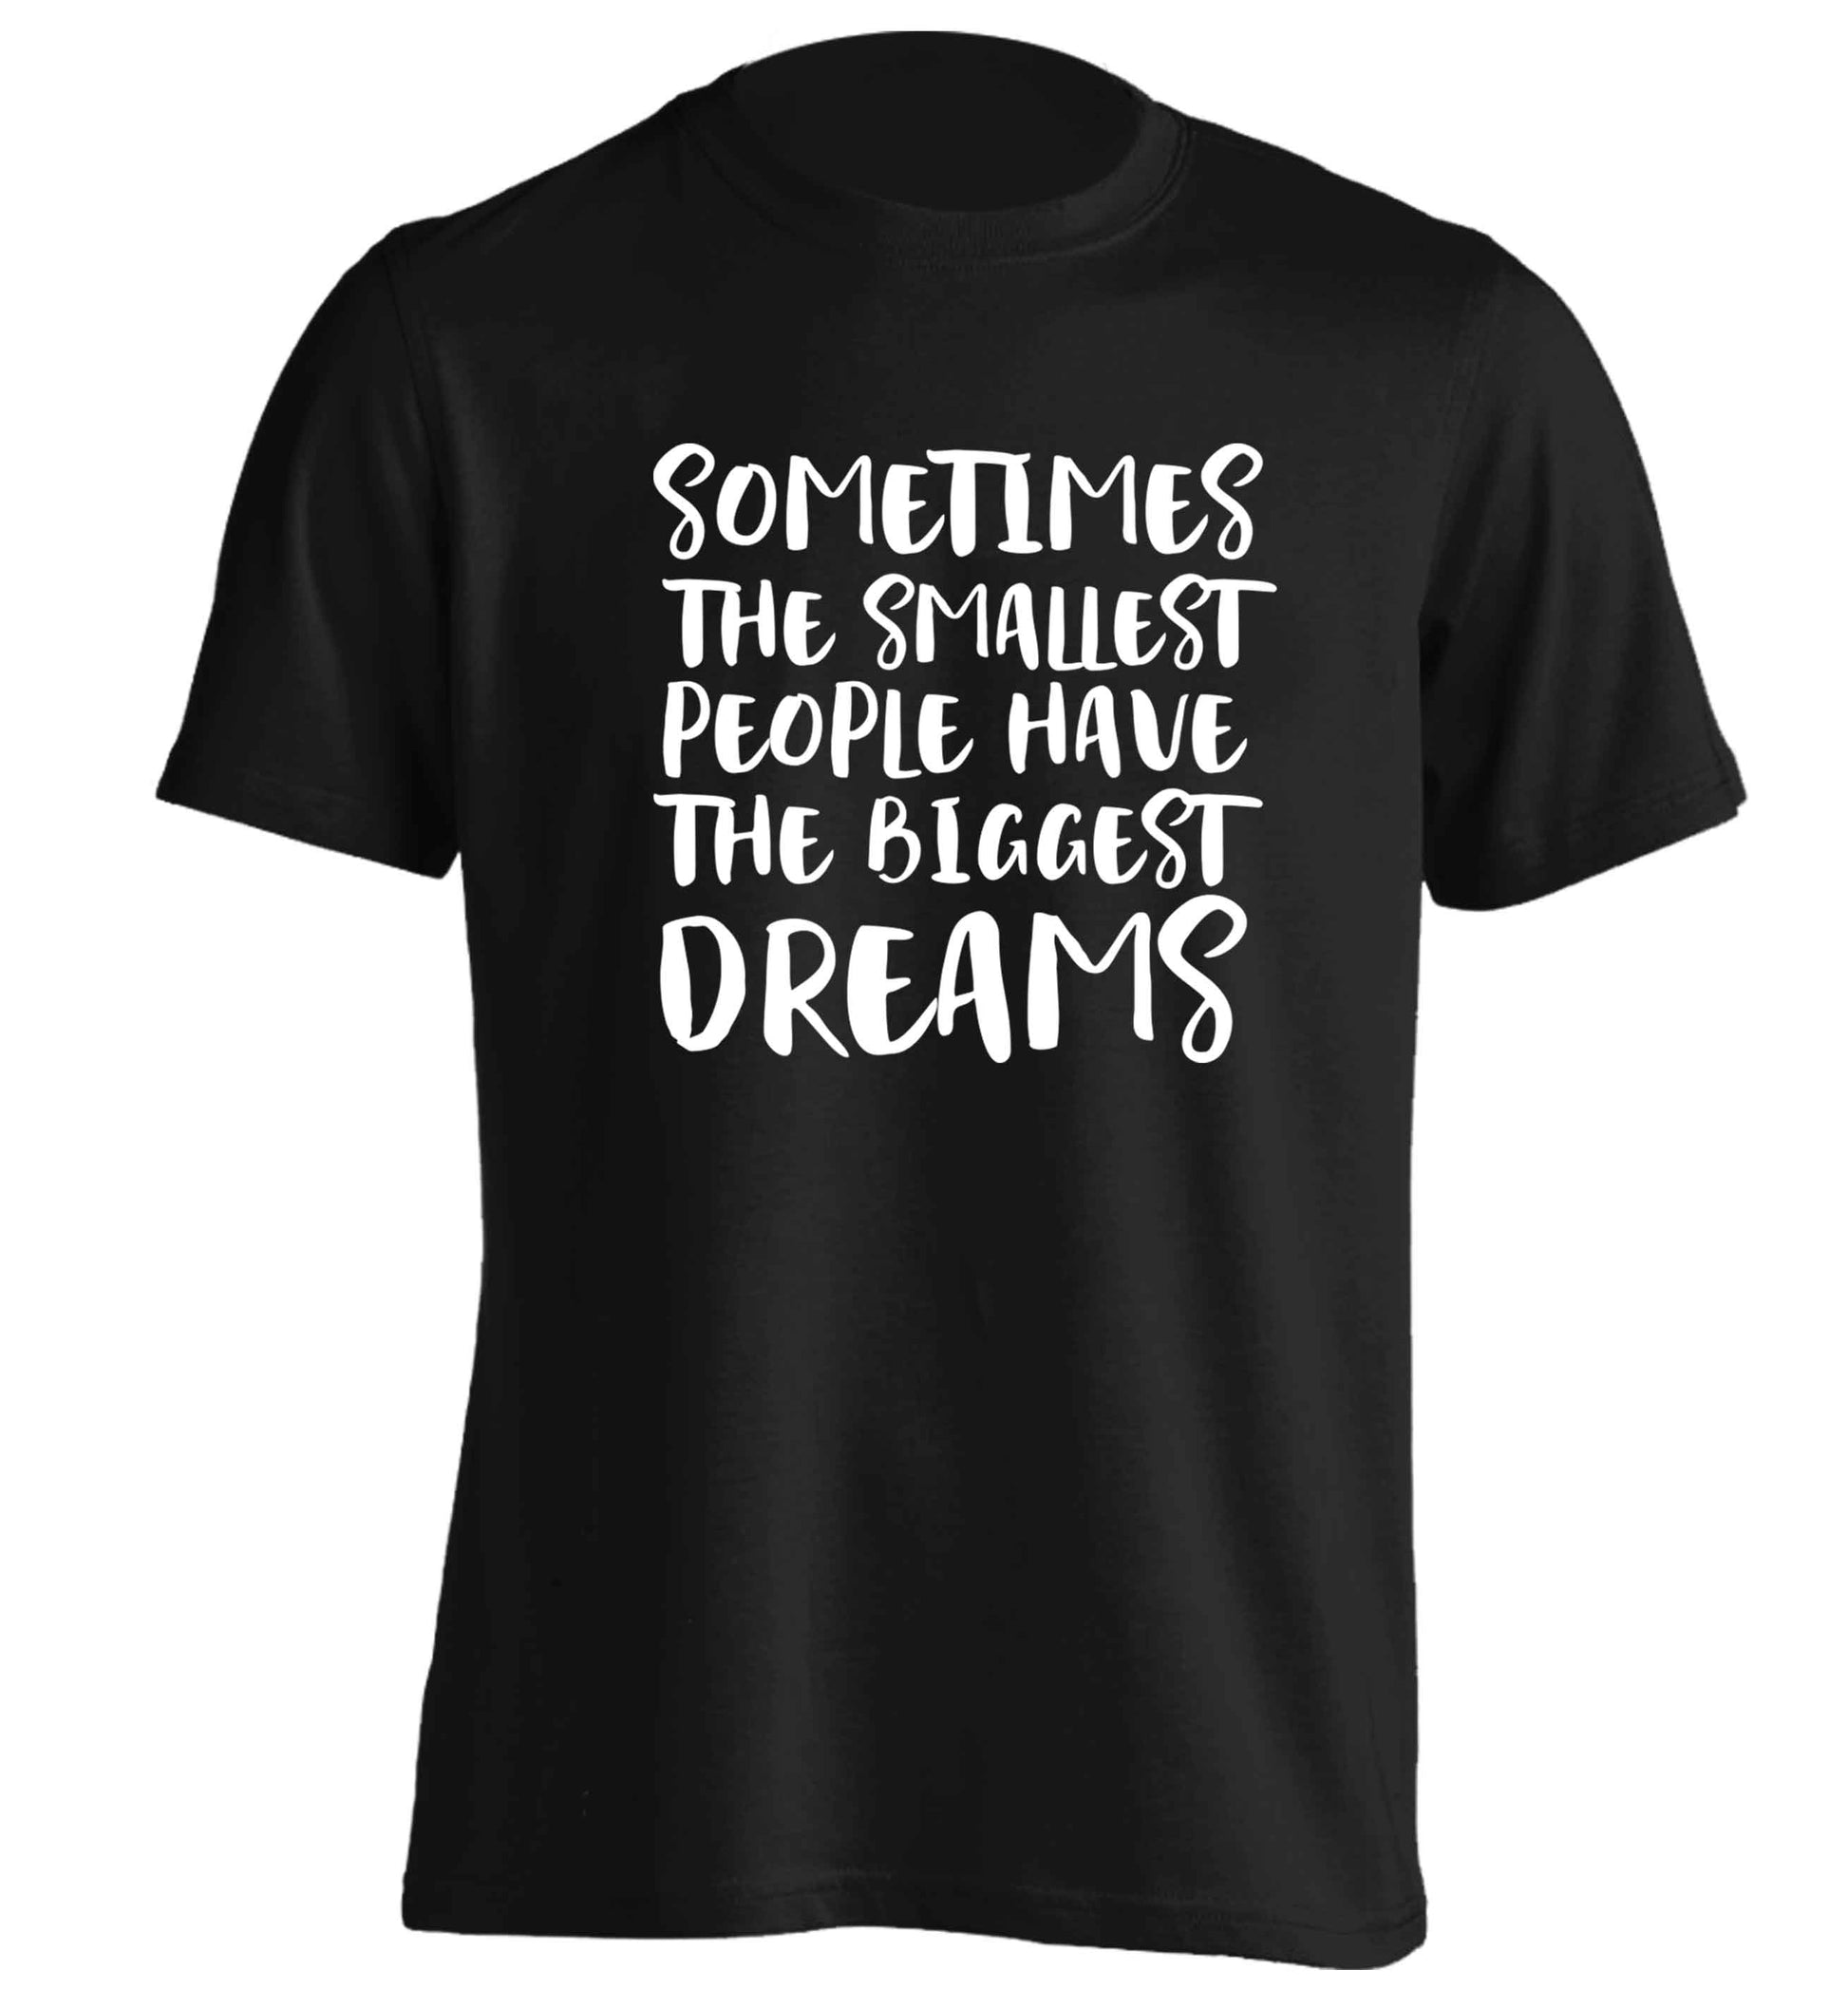 Sometimes the smallest people have the biggest dreams adults unisex black Tshirt 2XL